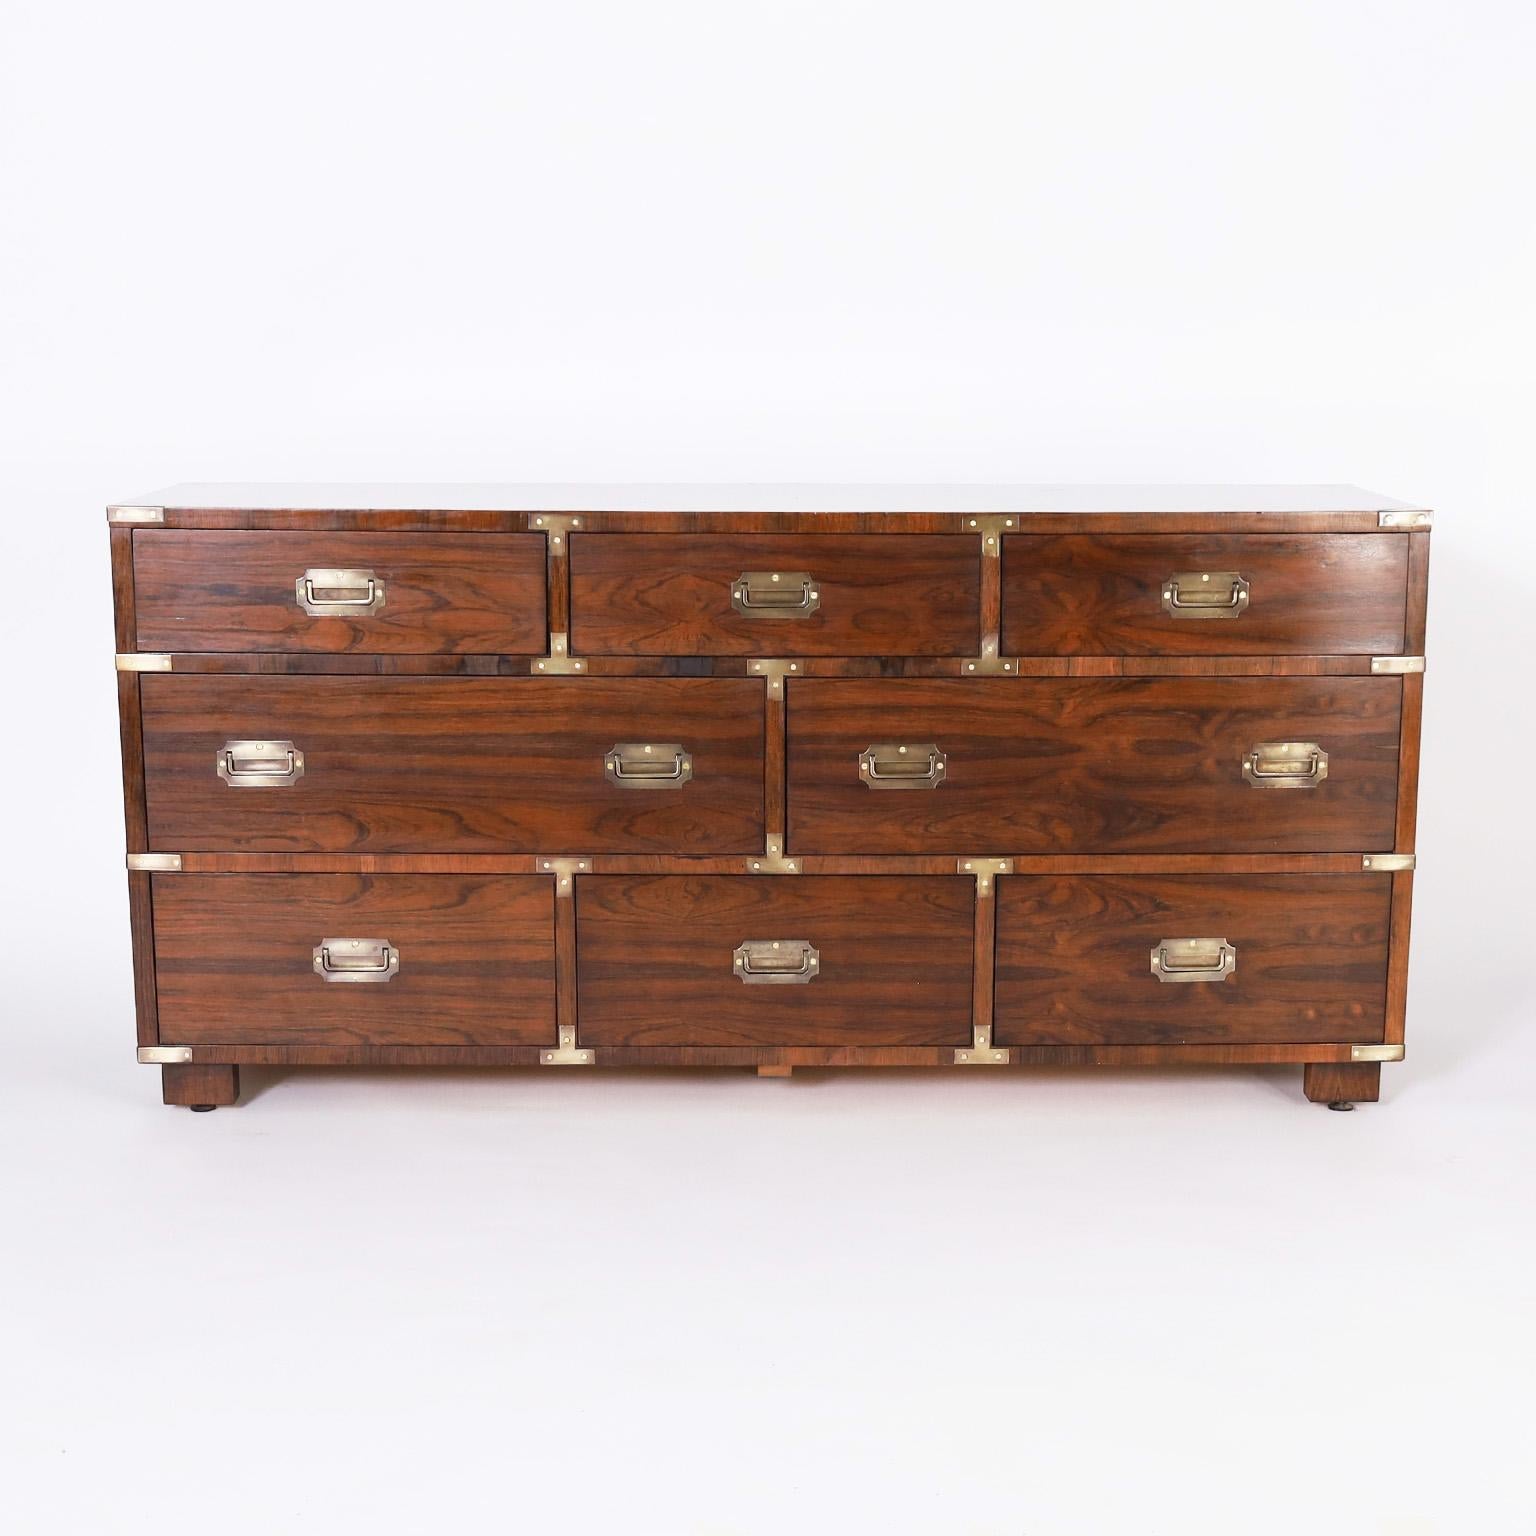 Handsome vintage campaign style chest with eight drawers crafted in rosewood with bold grains and cross banding on the front, brass hardware, and block feet. Perfect marriage of traditional and modern. Signed Dimension in a drawer.